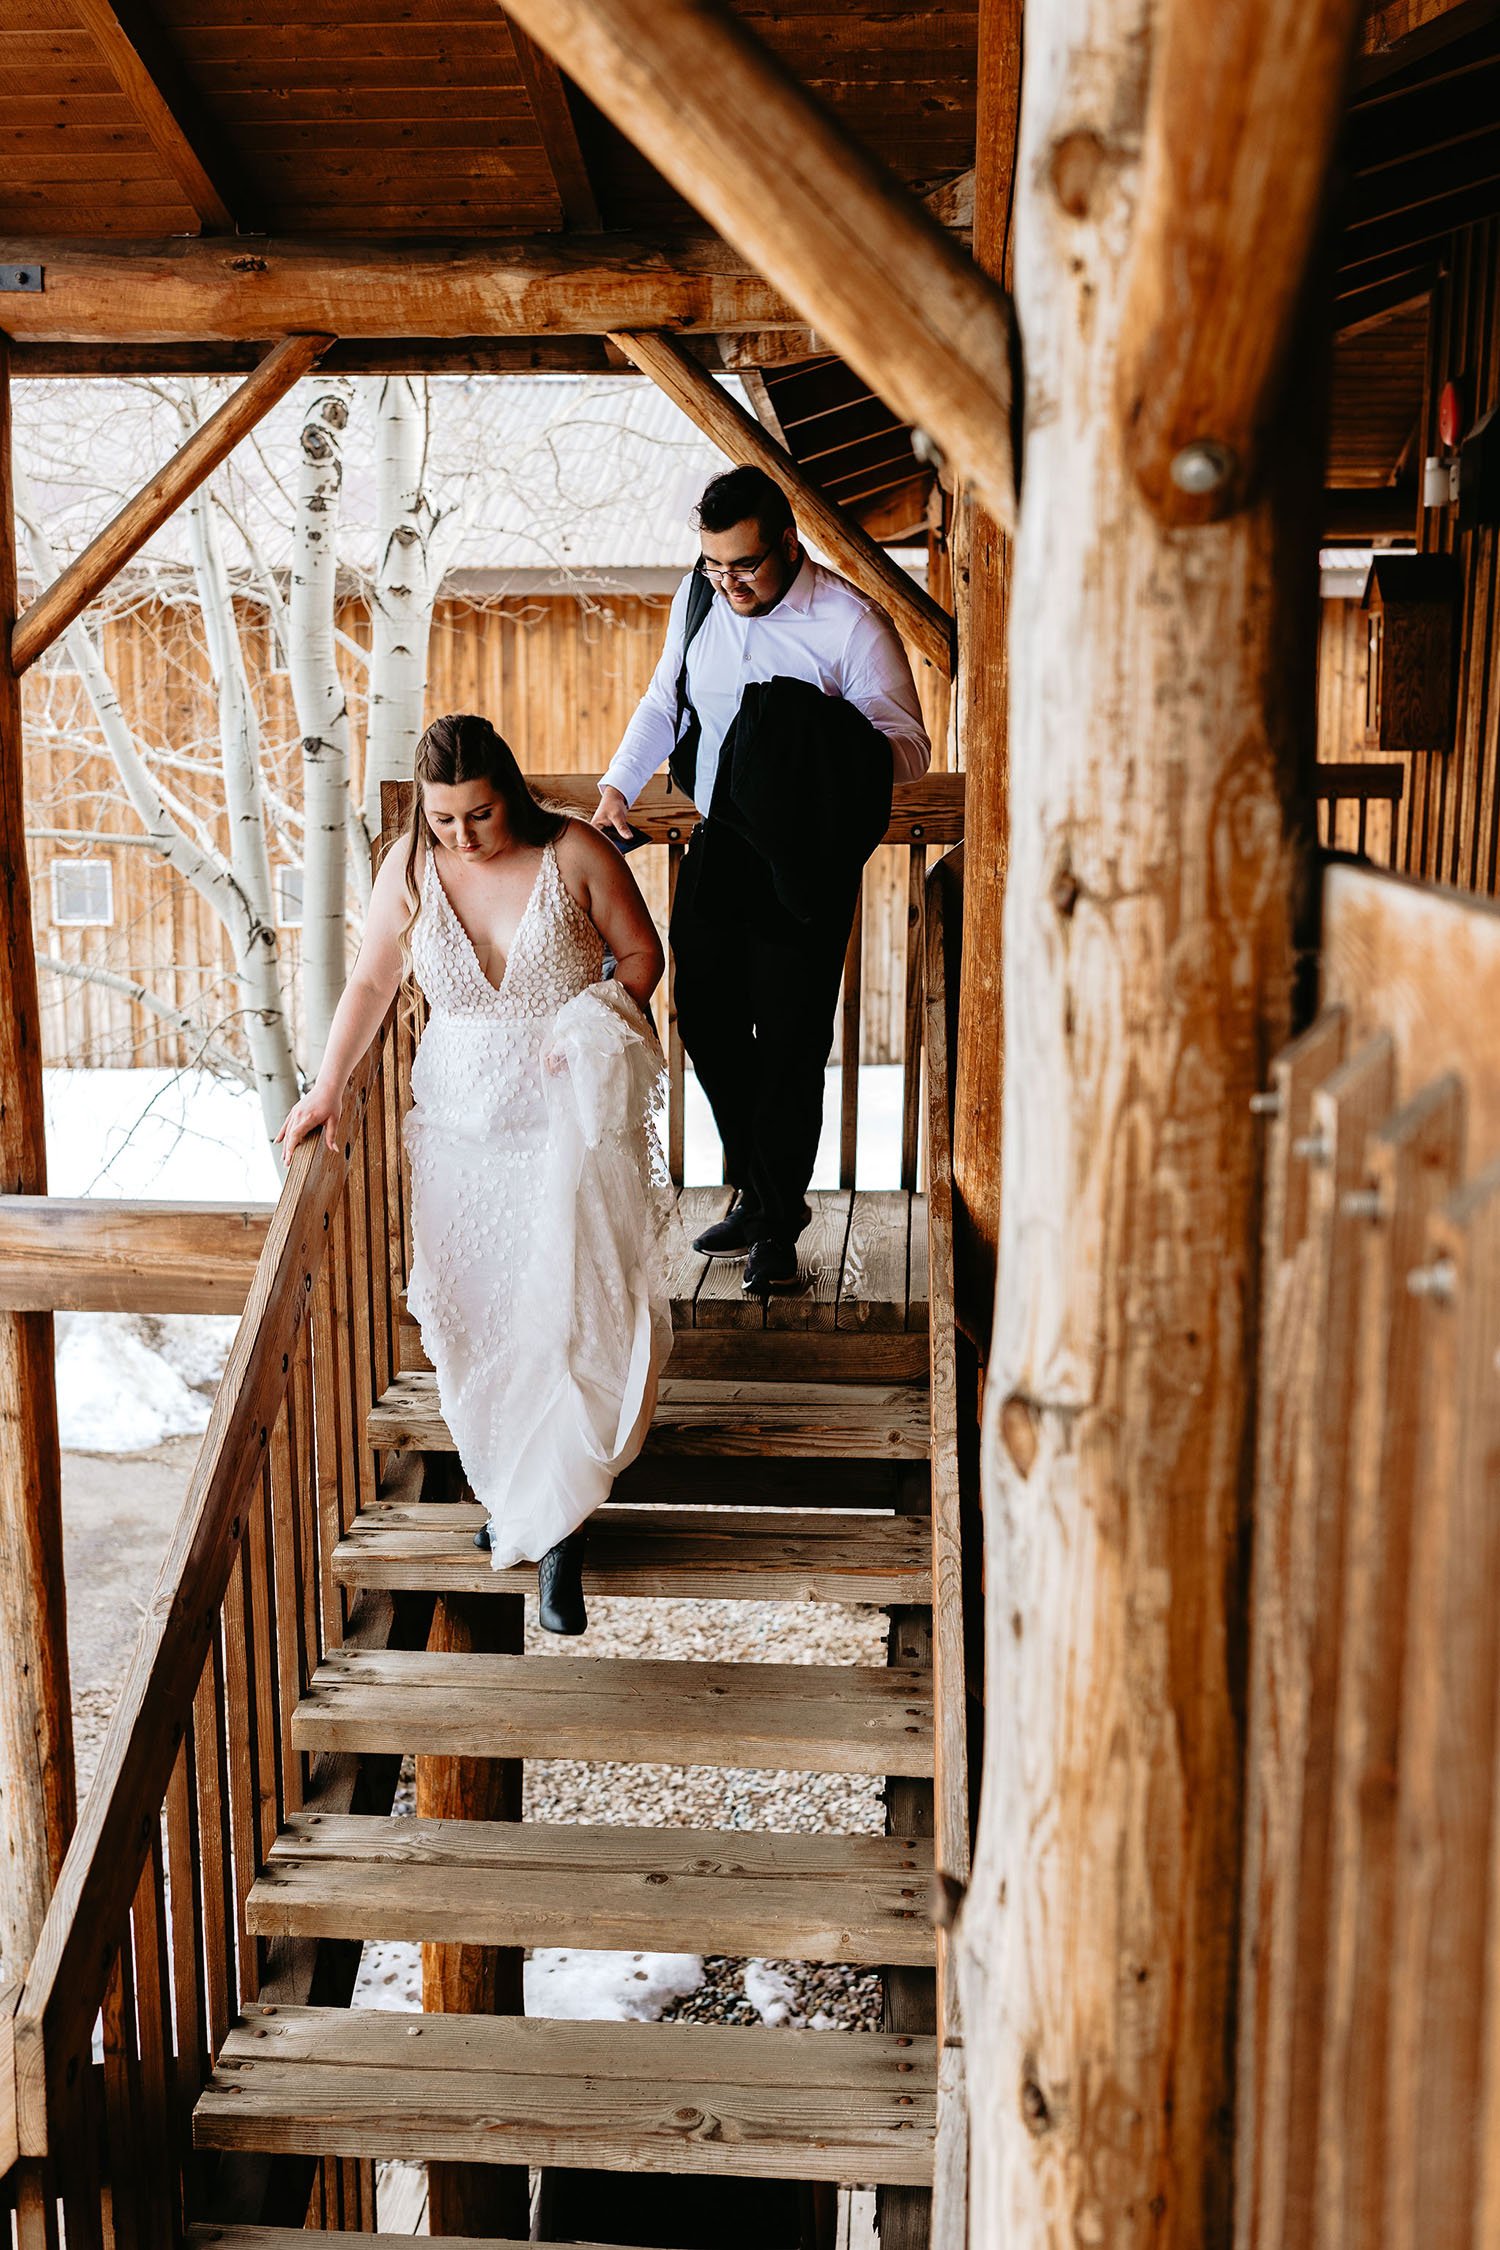  A bride wearing Made With Love ‘Louie’ wedding dress for a snowy Idaho elopement, walking down the steps of a rustic cabin with the groom on the way to exchange their vows 